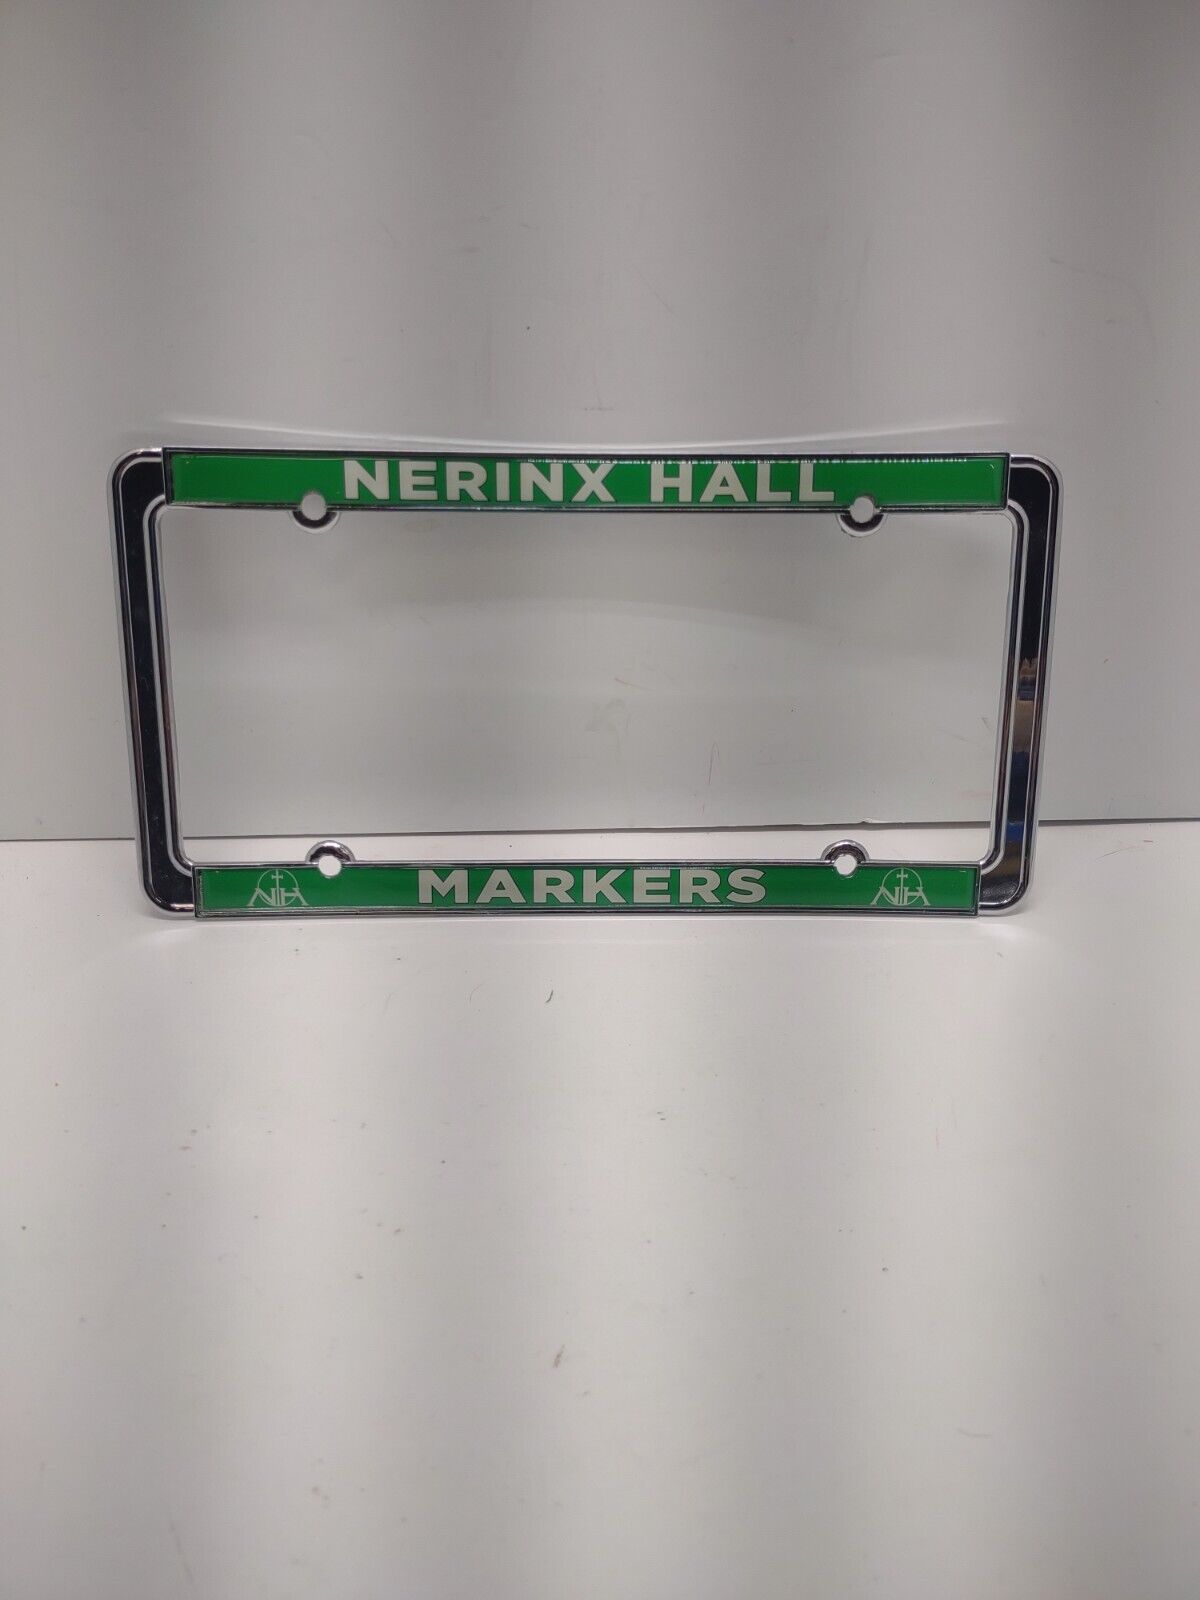 Nerinx Hall Markers License Plate Holder, Webster Groves MO, Catholic All Girls